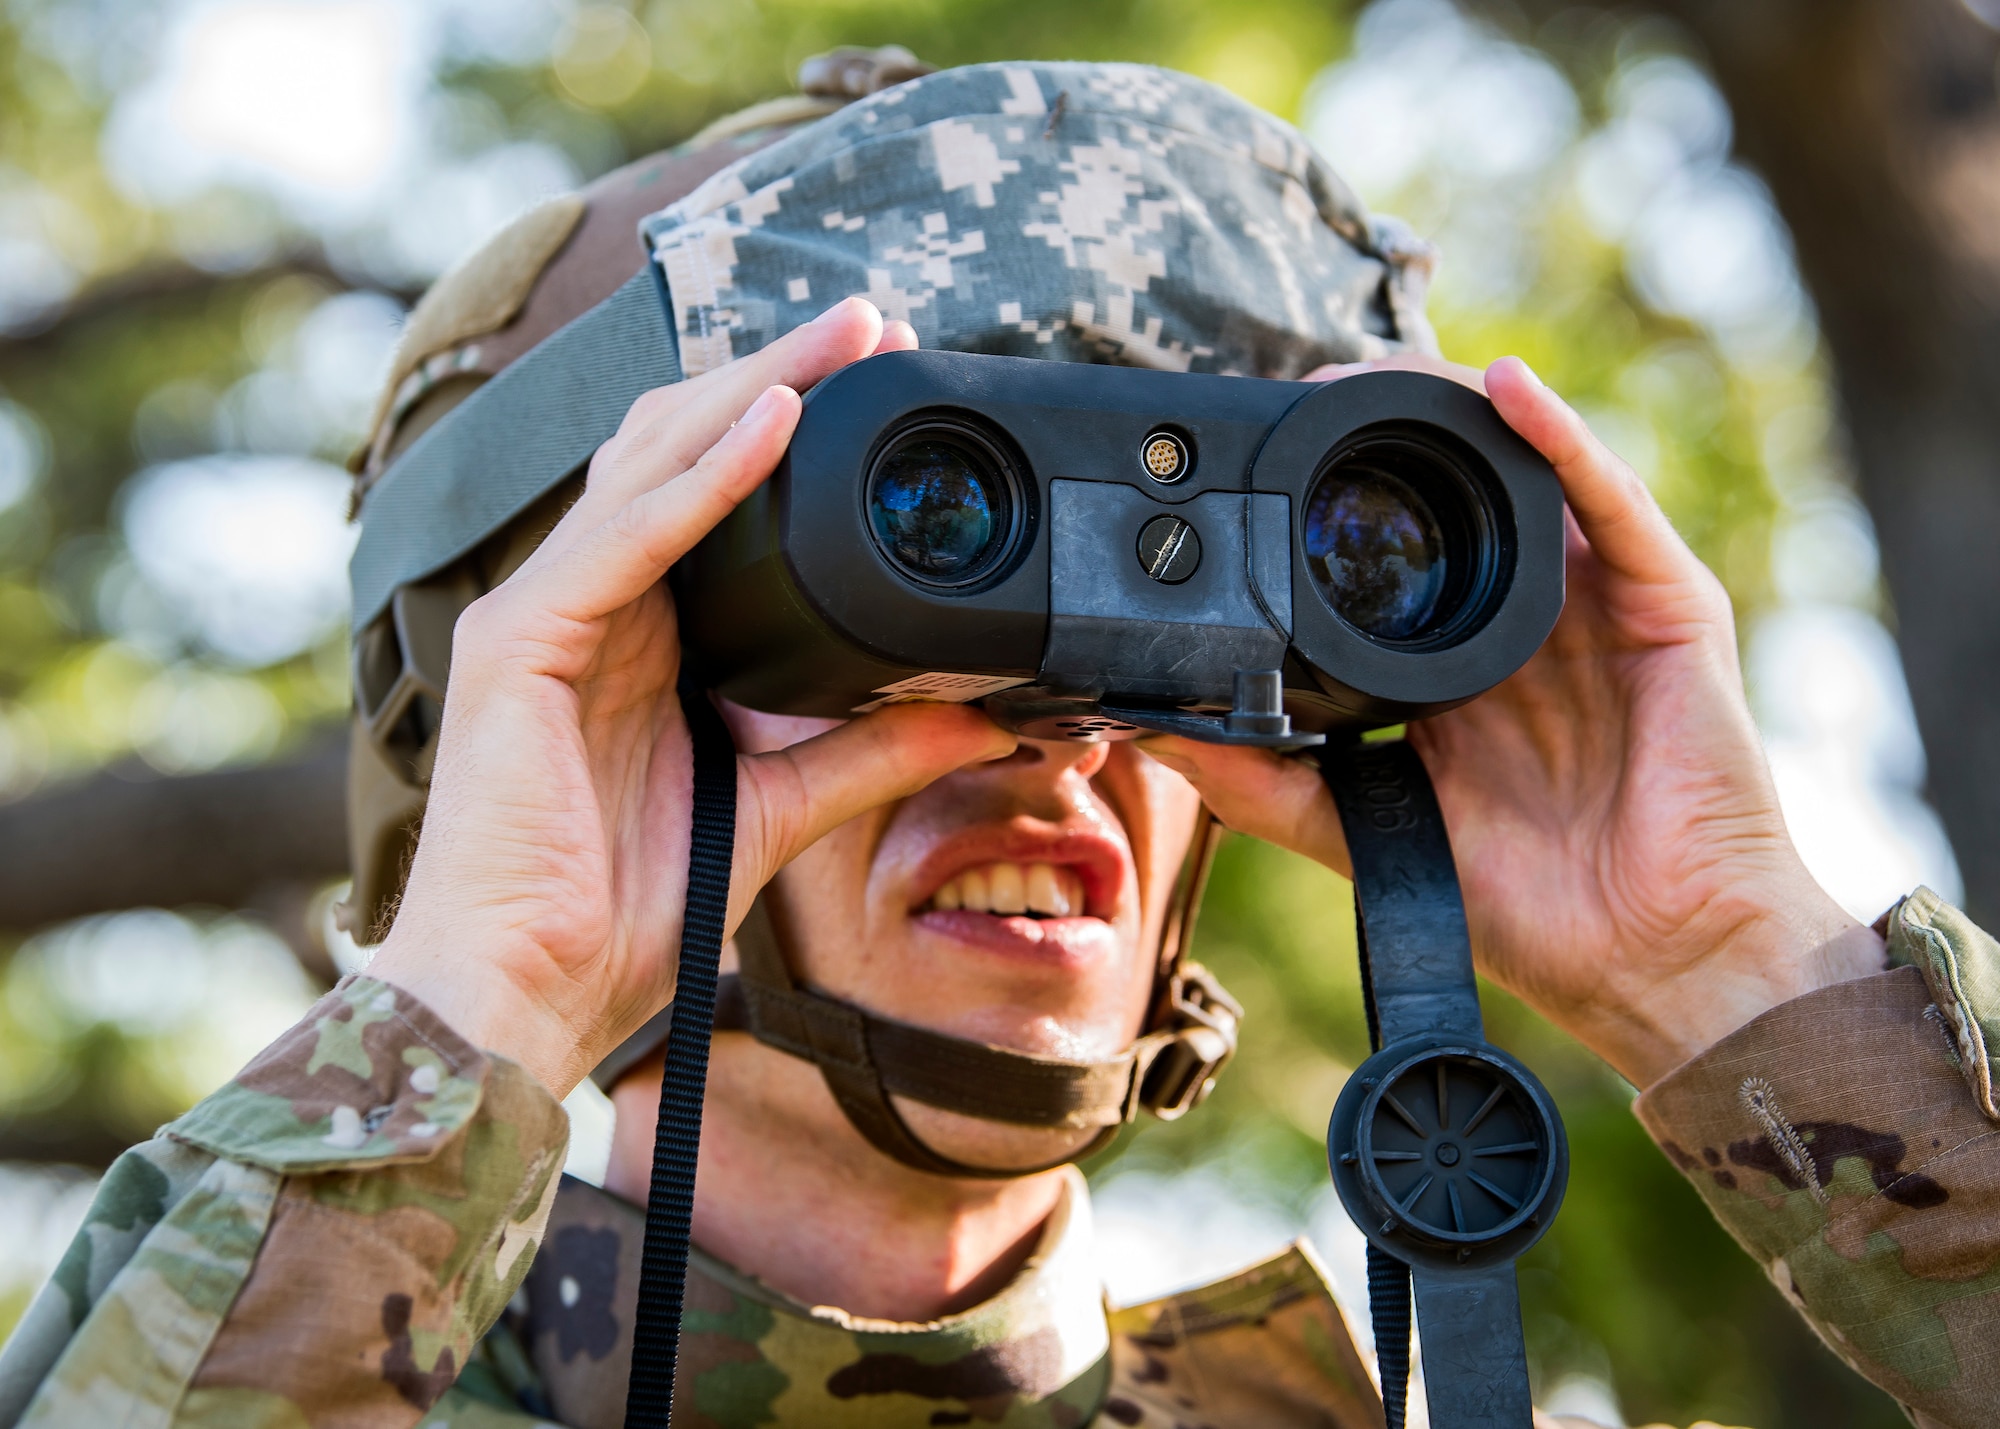 Airman 1st Class Mark Dunlop, 3d Weather Squadron weather forecaster, utilizes a laser range finder to locate a check point during a certification field exercise (CFX), July 31, 2019, at Camp Bowie Training Center, Texas. The CFX was designed to evaluate the squadron’s overall tactical ability and readiness to provide the U.S. Army with full spectrum environmental support to the Joint Task Force (JTF) fight. The CFX immersed Airmen into all the aspects of what could come with a deployment such as Land Navigation. (U.S. Air Force photo by Airman 1st Class Eugene Oliver)